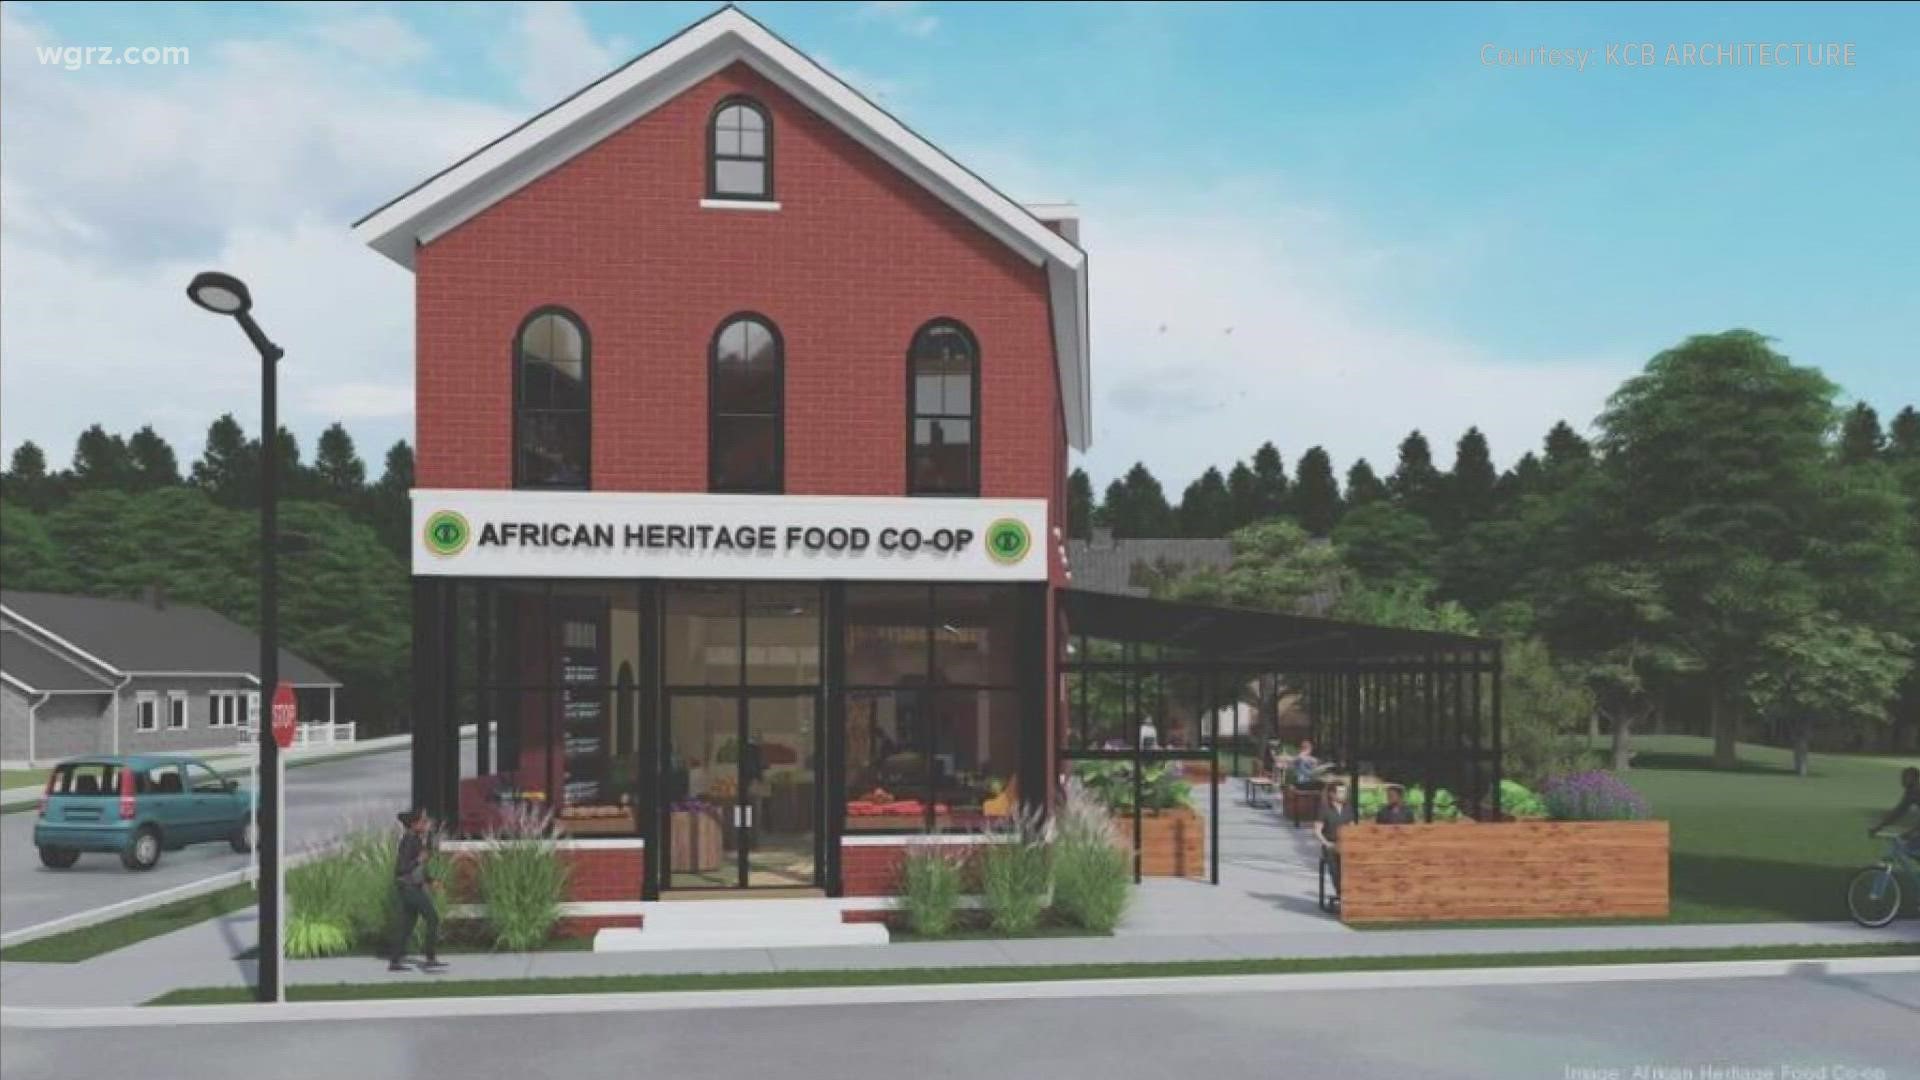 We're celebrating Western New York with a major expansion for a popular community food market in Buffalo.